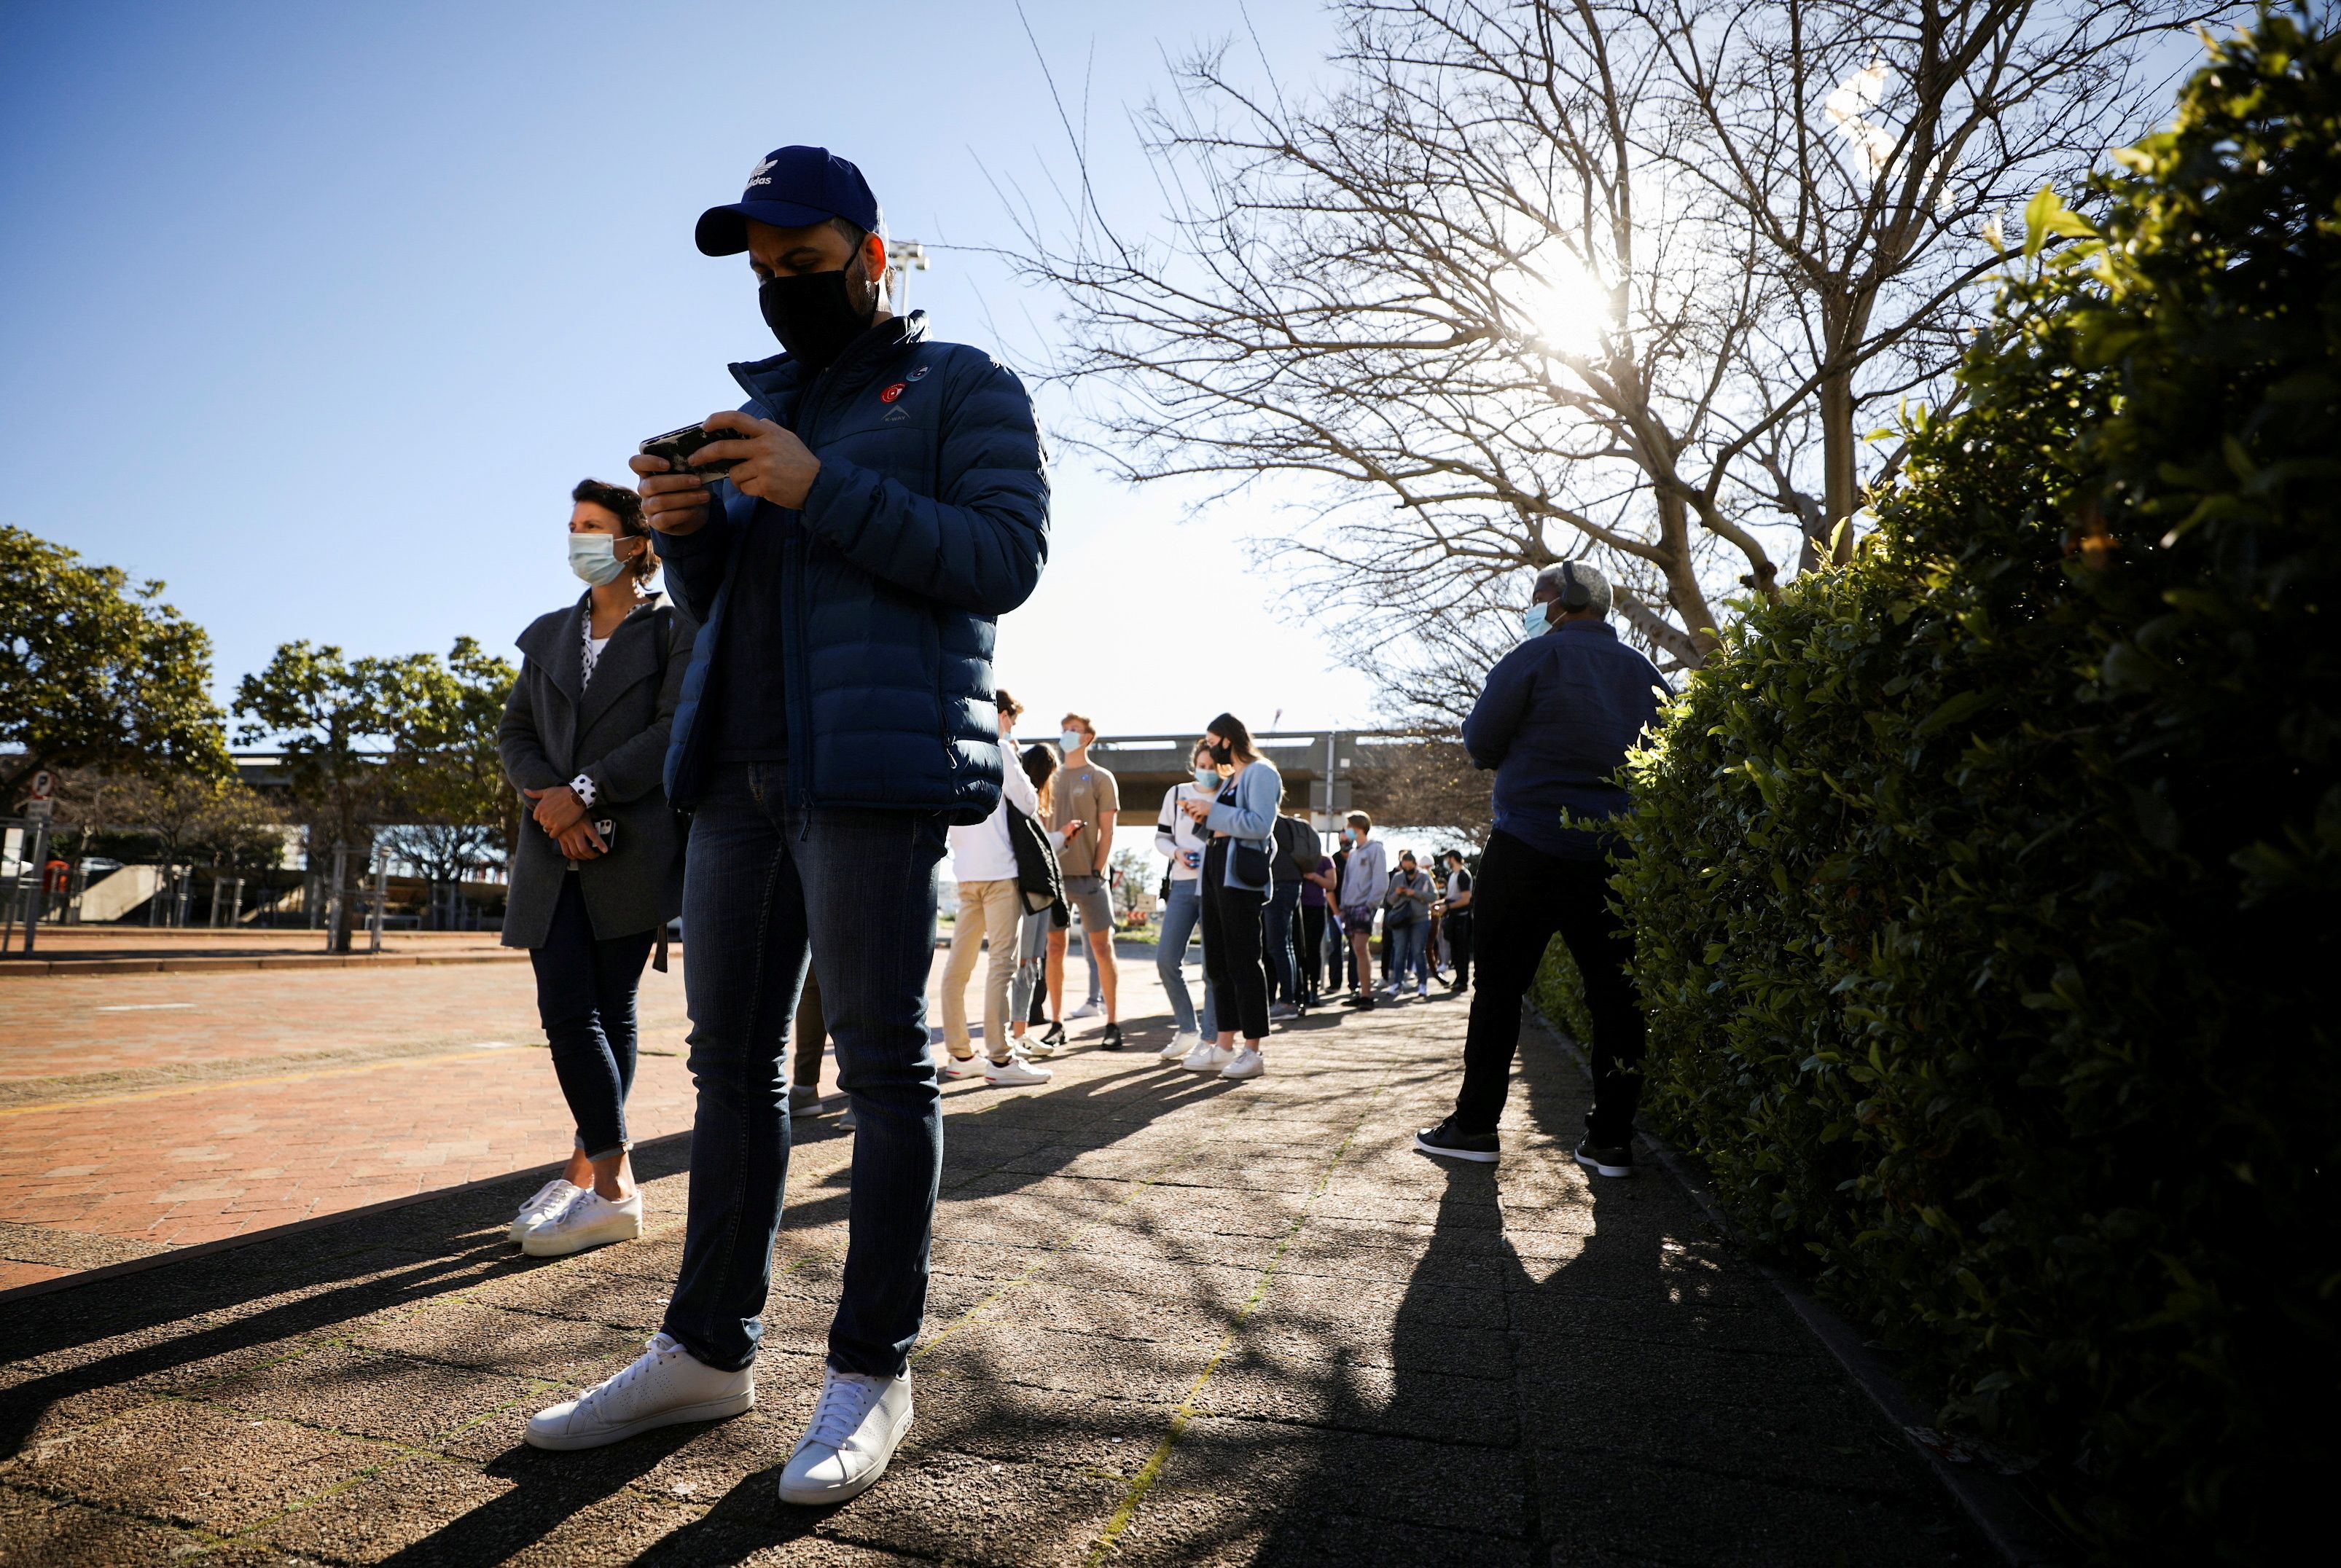  People queue outside a coronavirus disease (COVID-19) vaccination centre as the country opens vaccinations for everyone 18 years old and above in Cape Town, South Africa, August 20, 2021.  REUTERS/Mike Hutchings/File Photo